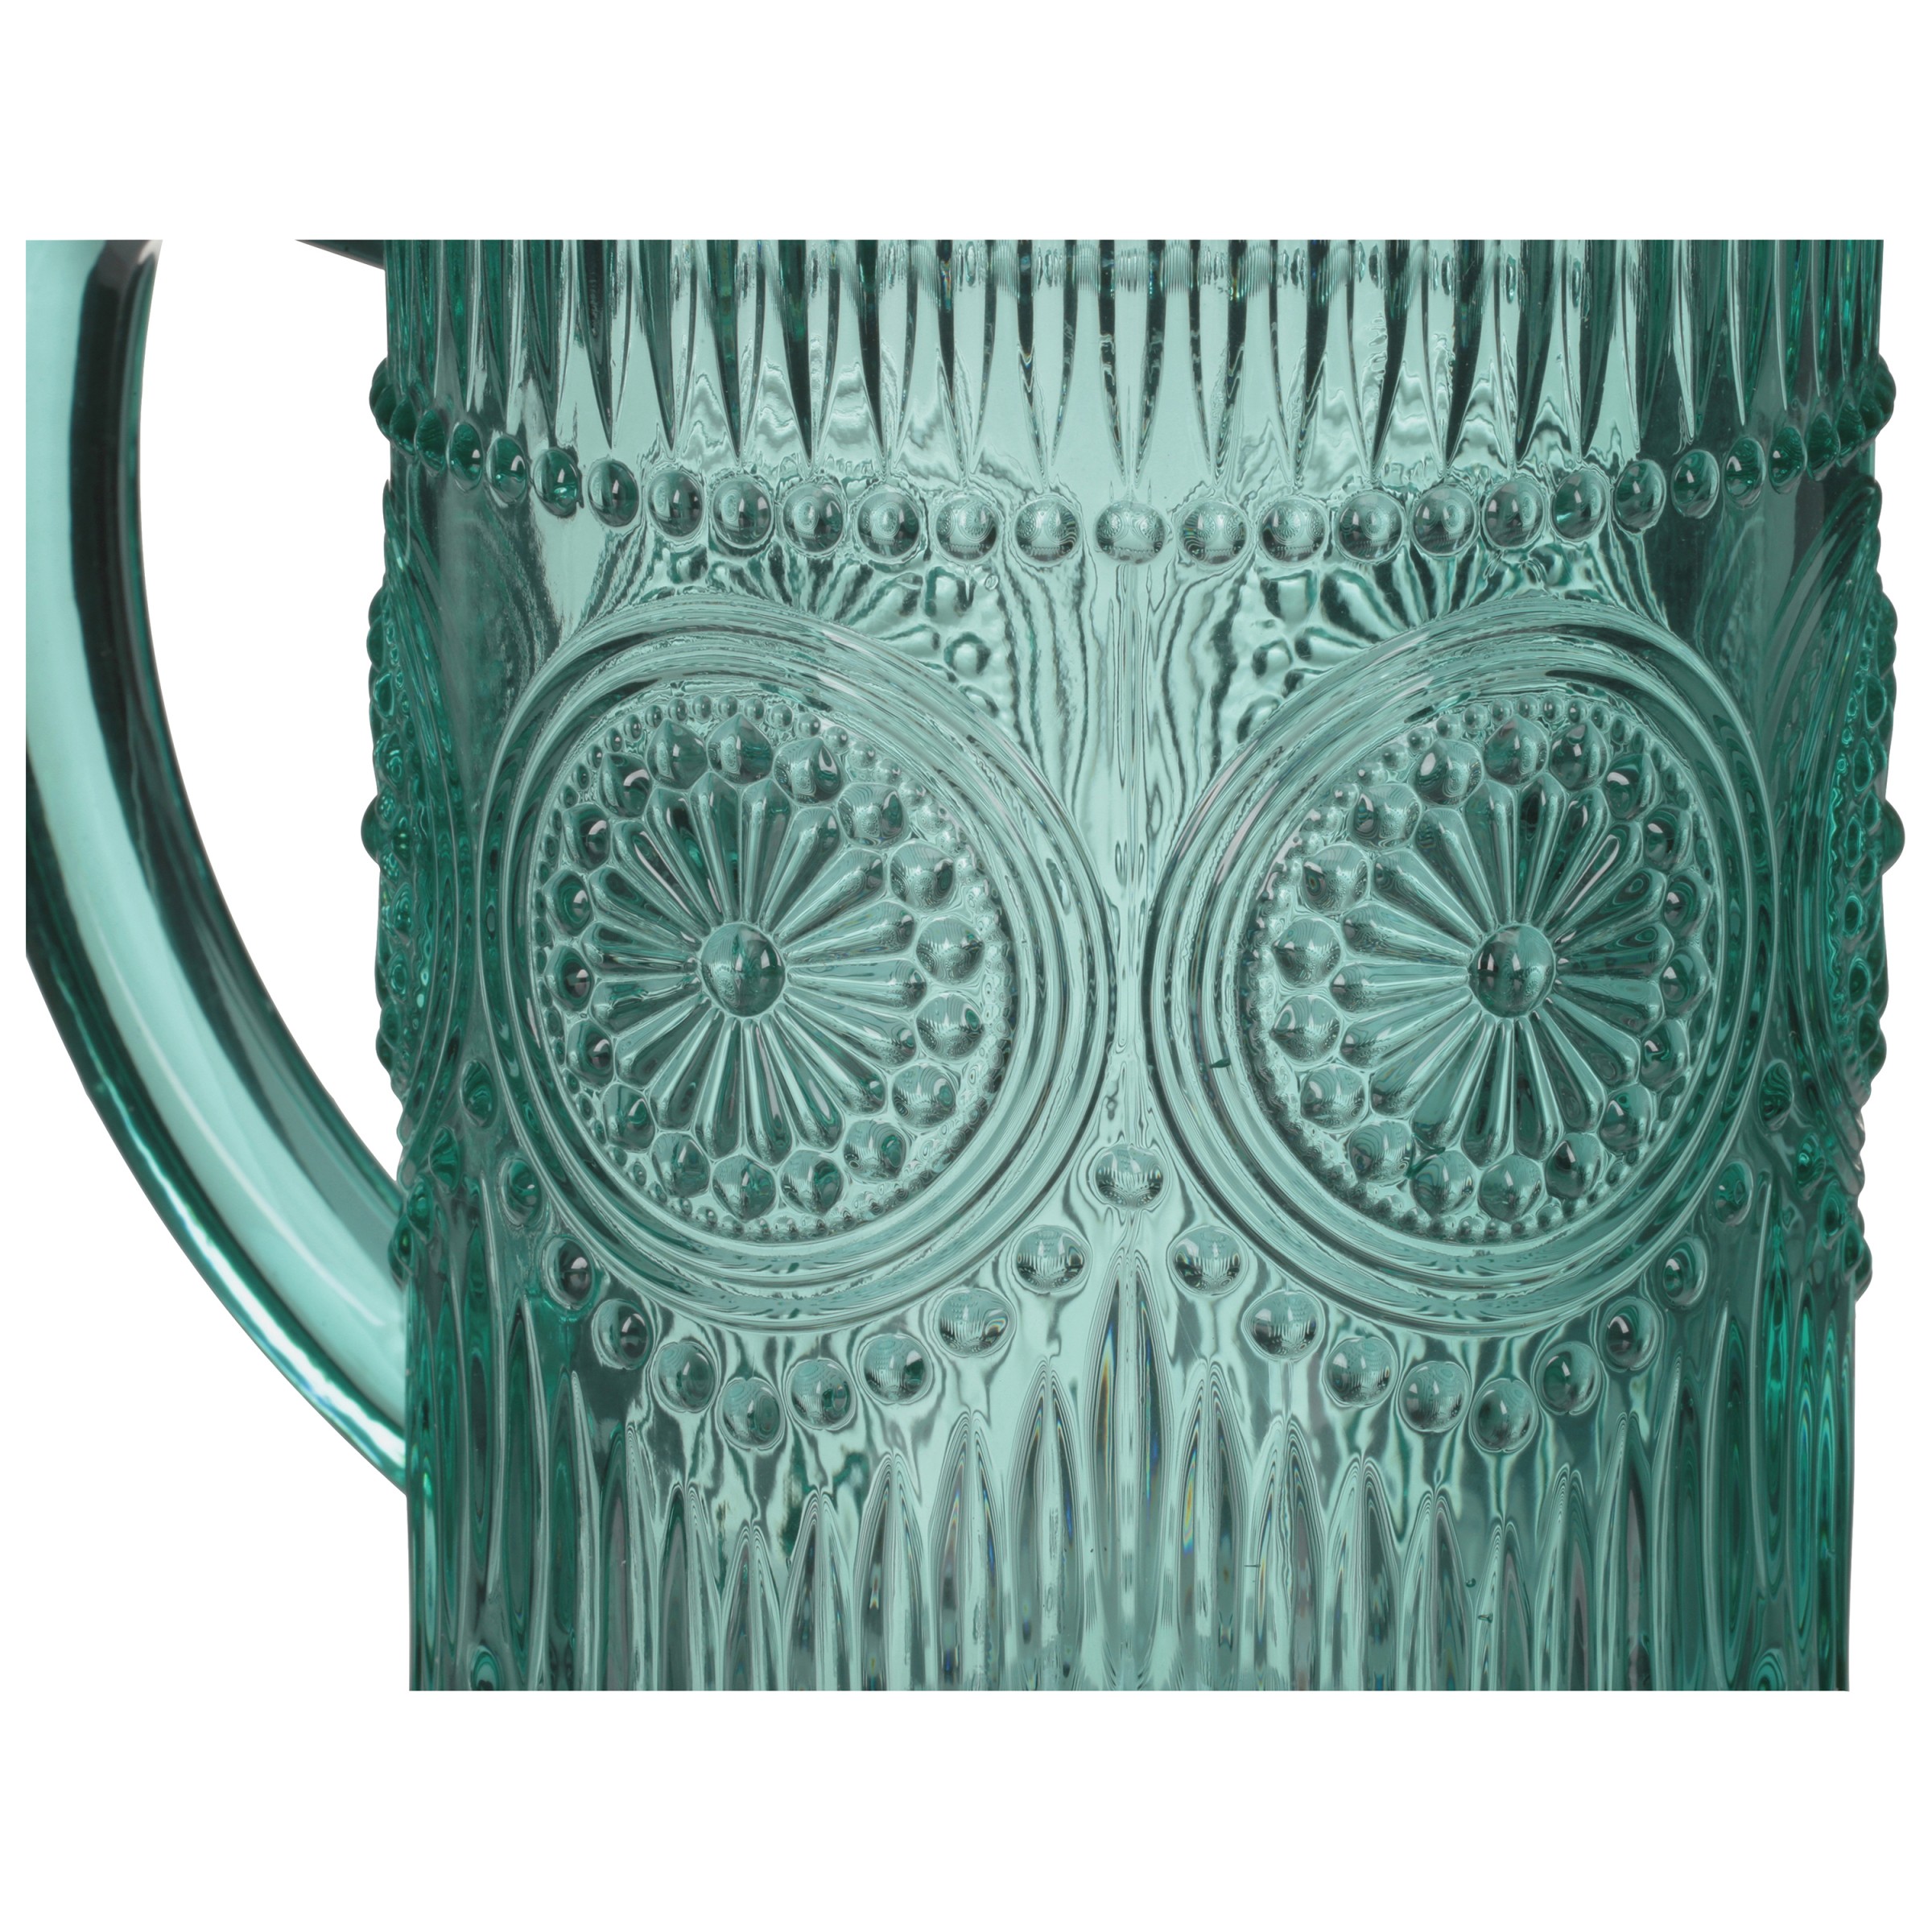 The Pioneer Woman Adeline 1.59-Liter Glass Pitcher - image 3 of 9